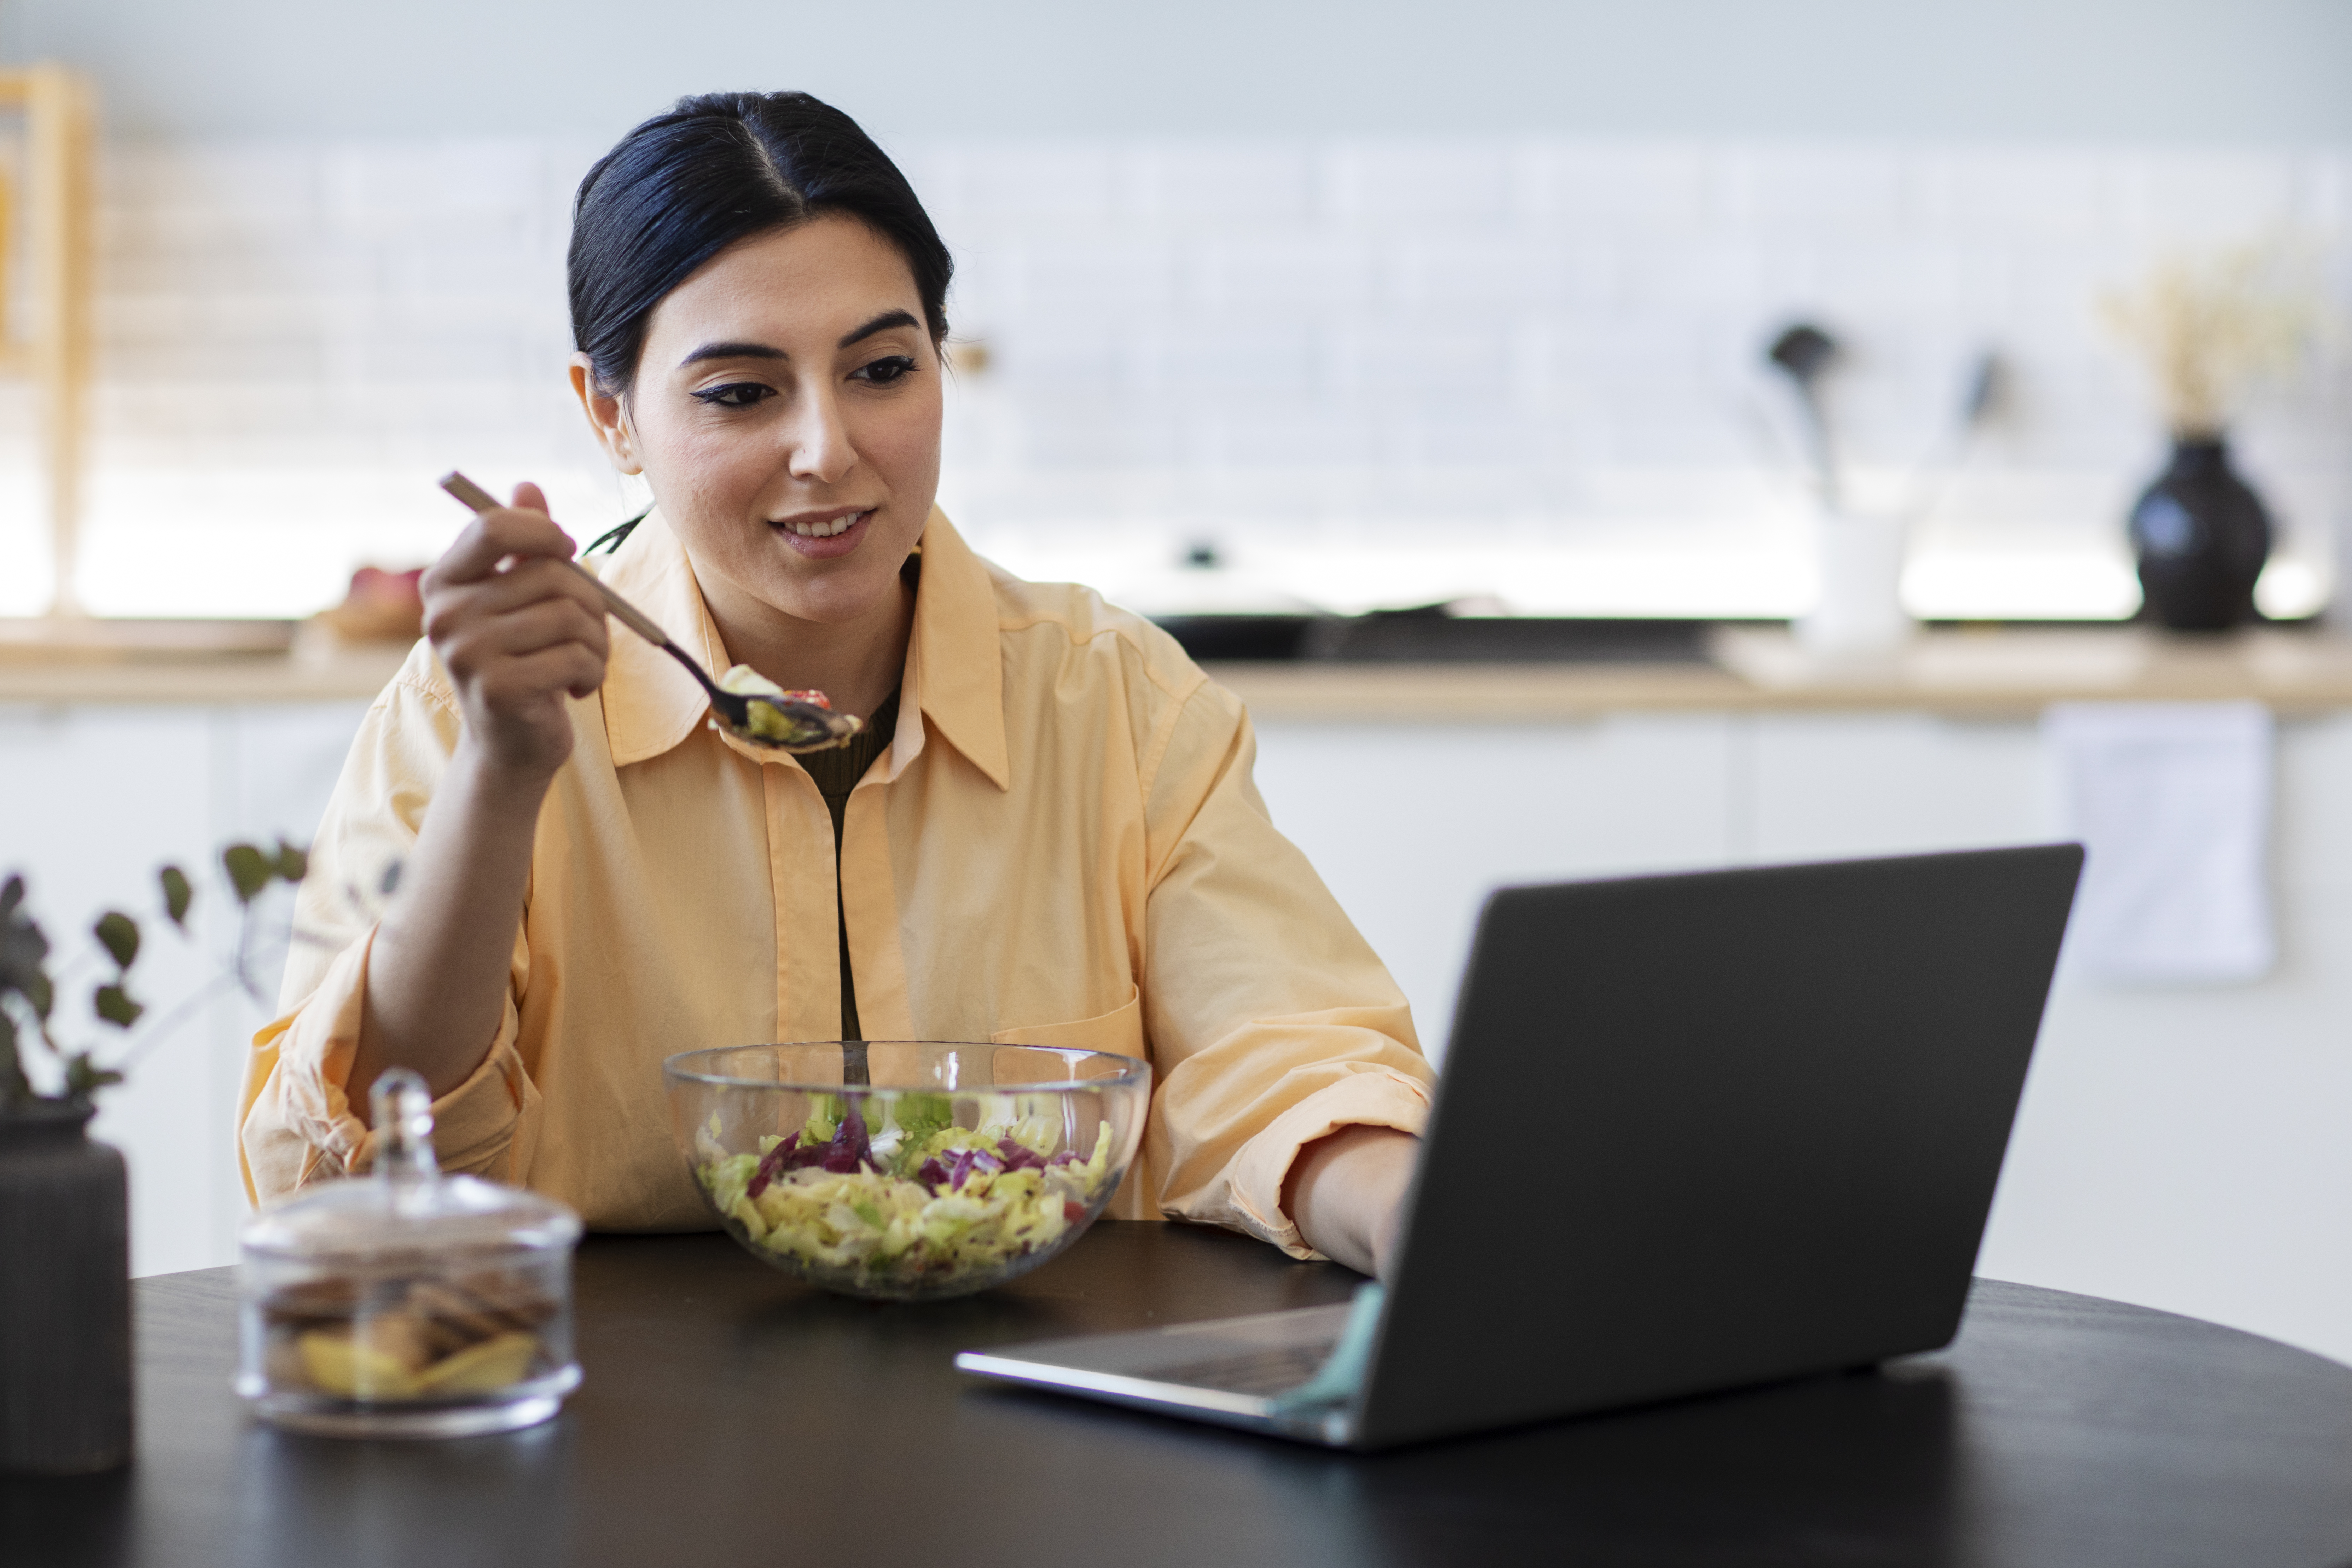 young-woman-eating-salad-while-engrossed-in-Laptop